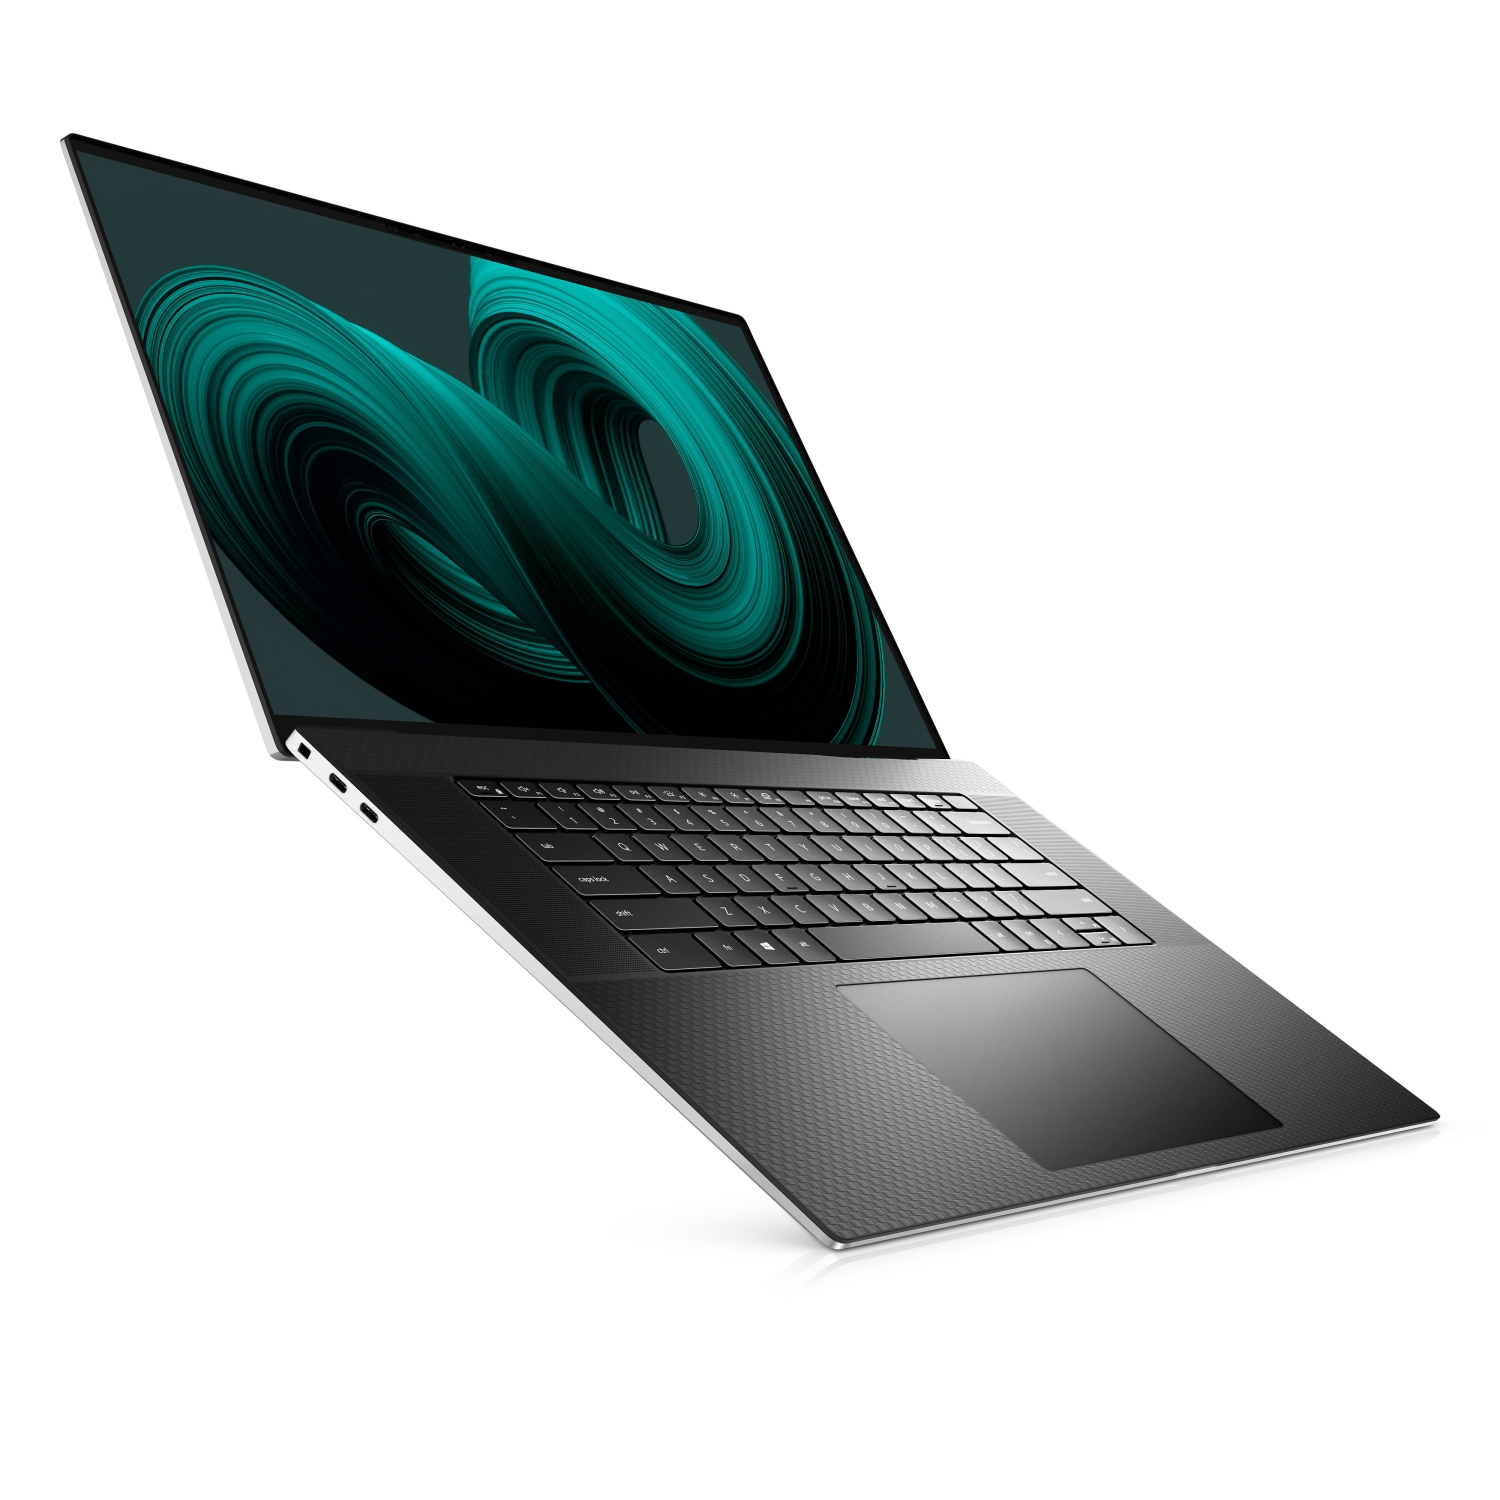 Refurbished (Excellent) – Dell XPS 9710 Laptop (2021) | 17" 4K Touch | Core i7 - 2TB SSD - 64GB RAM - RTX 3060 | 8 Cores @ 4.6 GHz - 11th Gen CPU - 6GB GDDR6